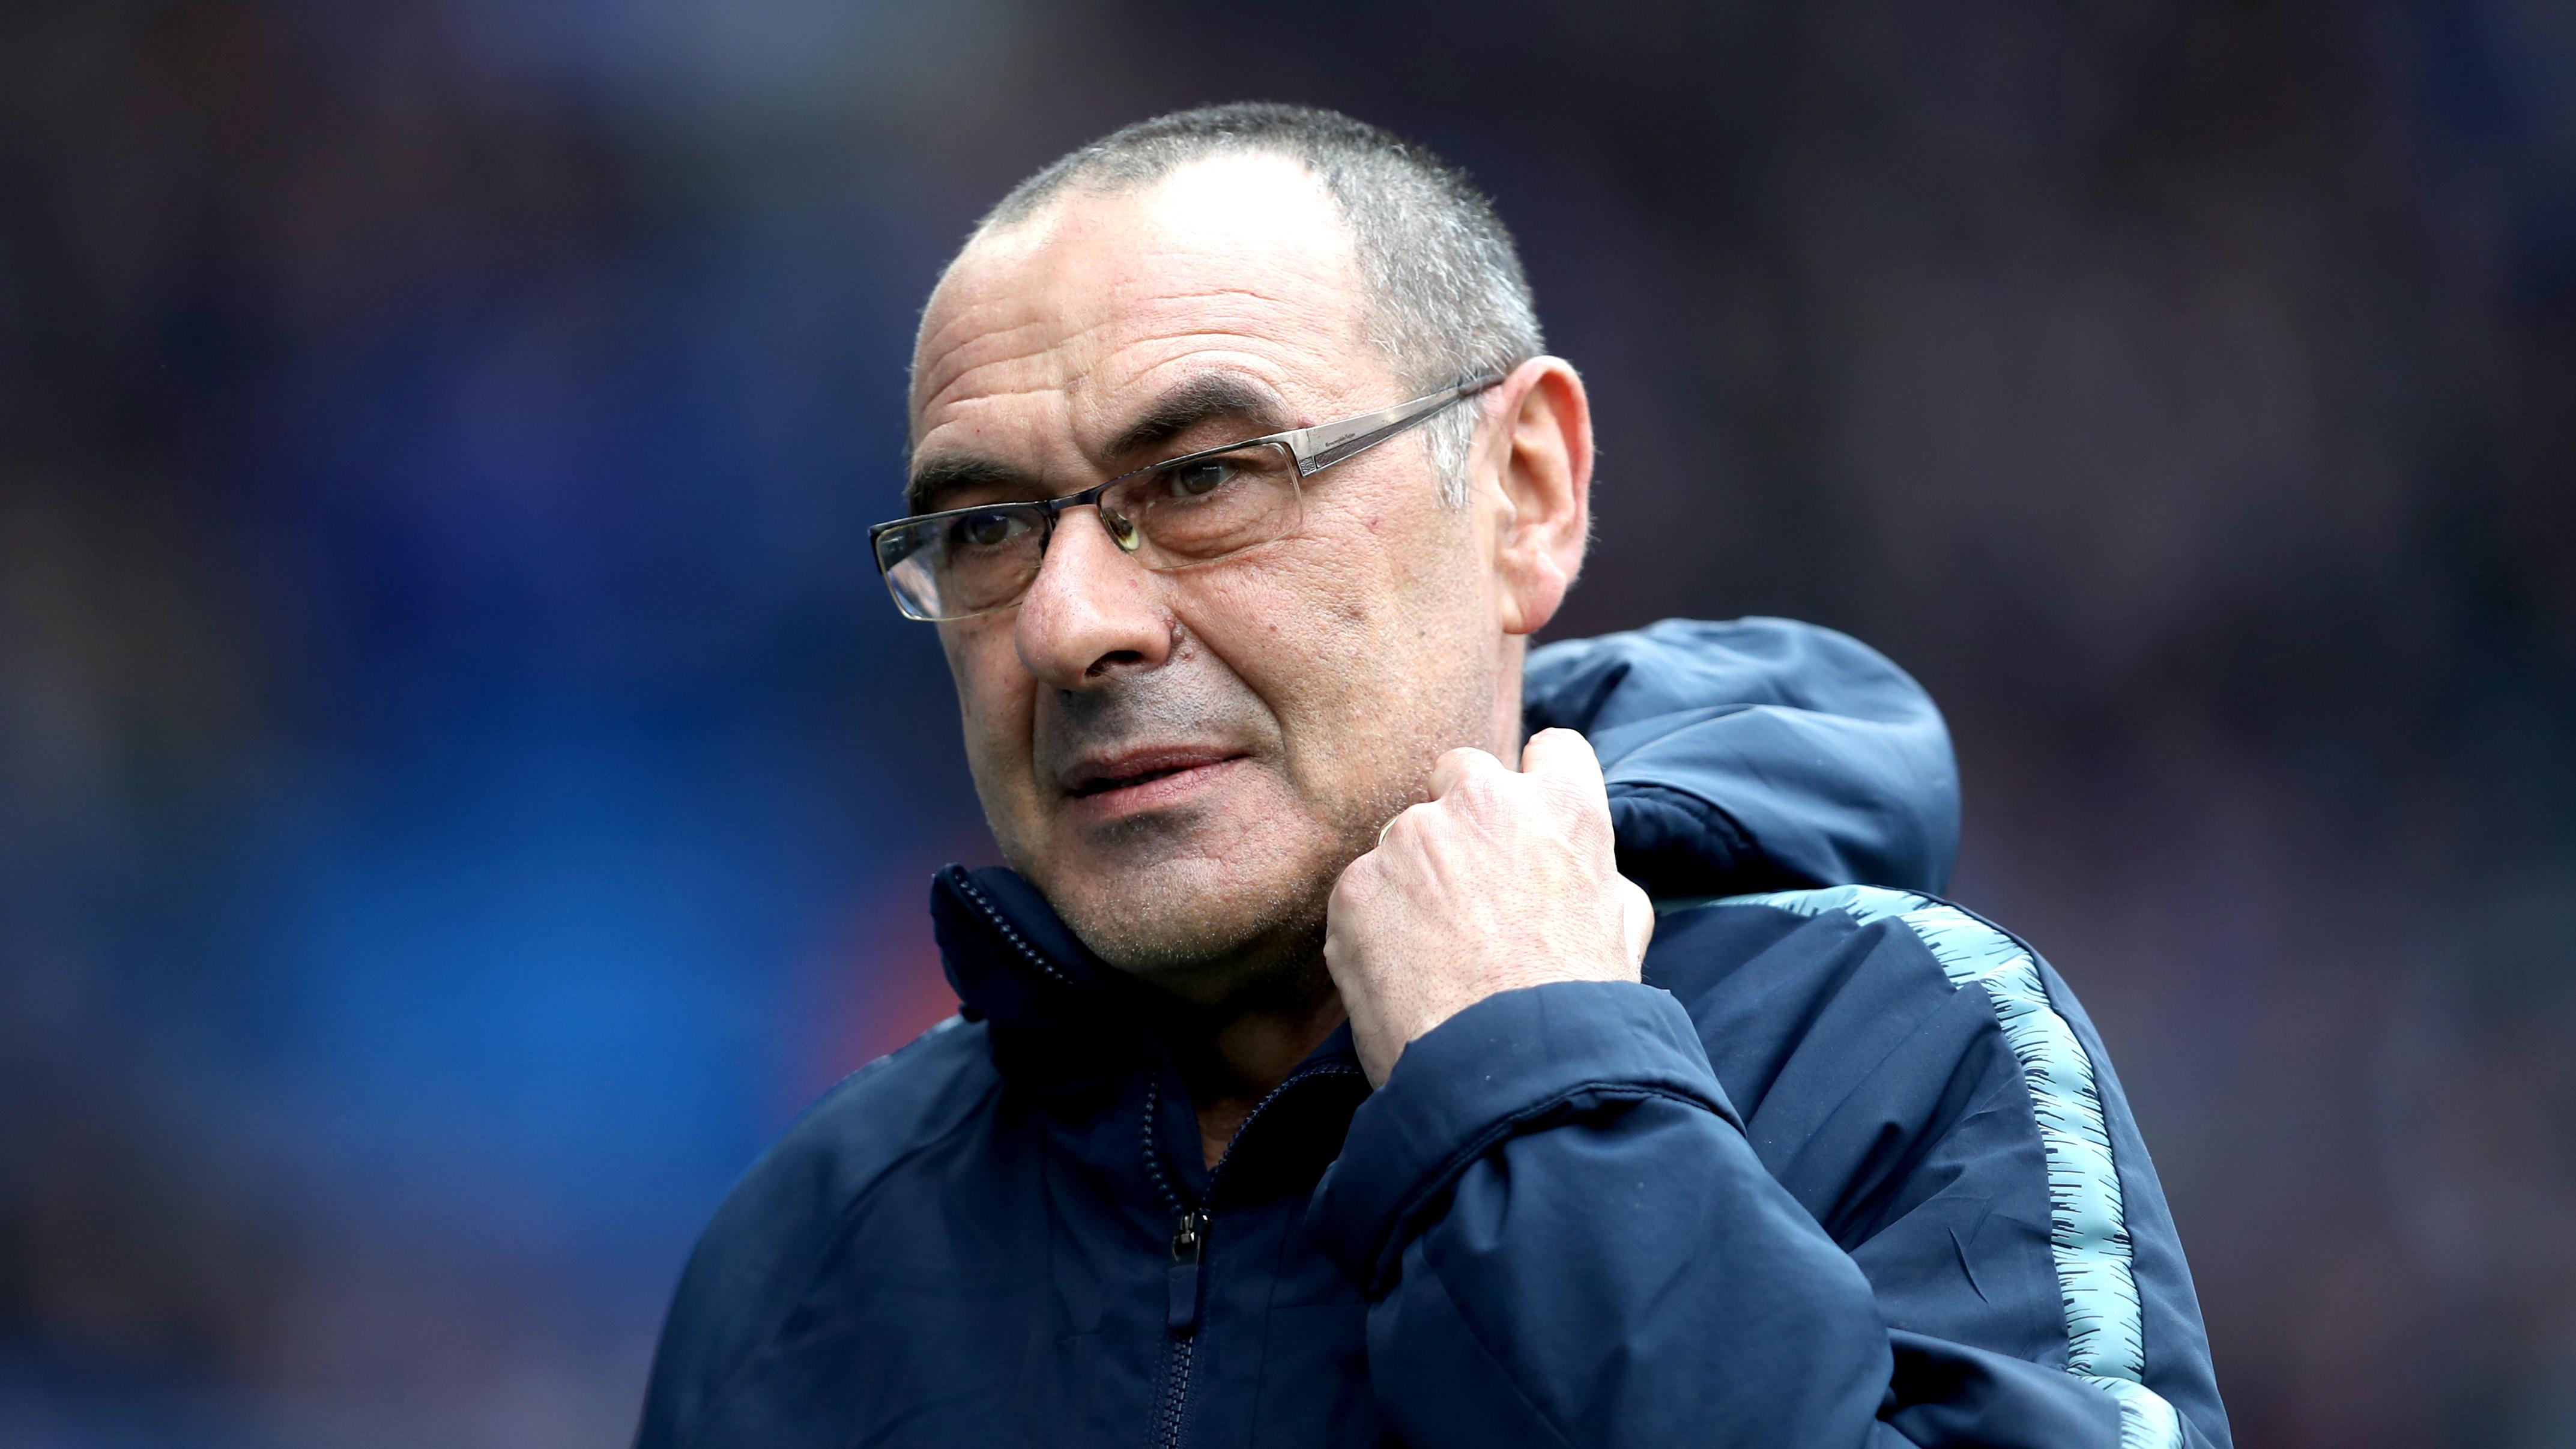 I’m a lucky man to be at Chelsea, Sarri says